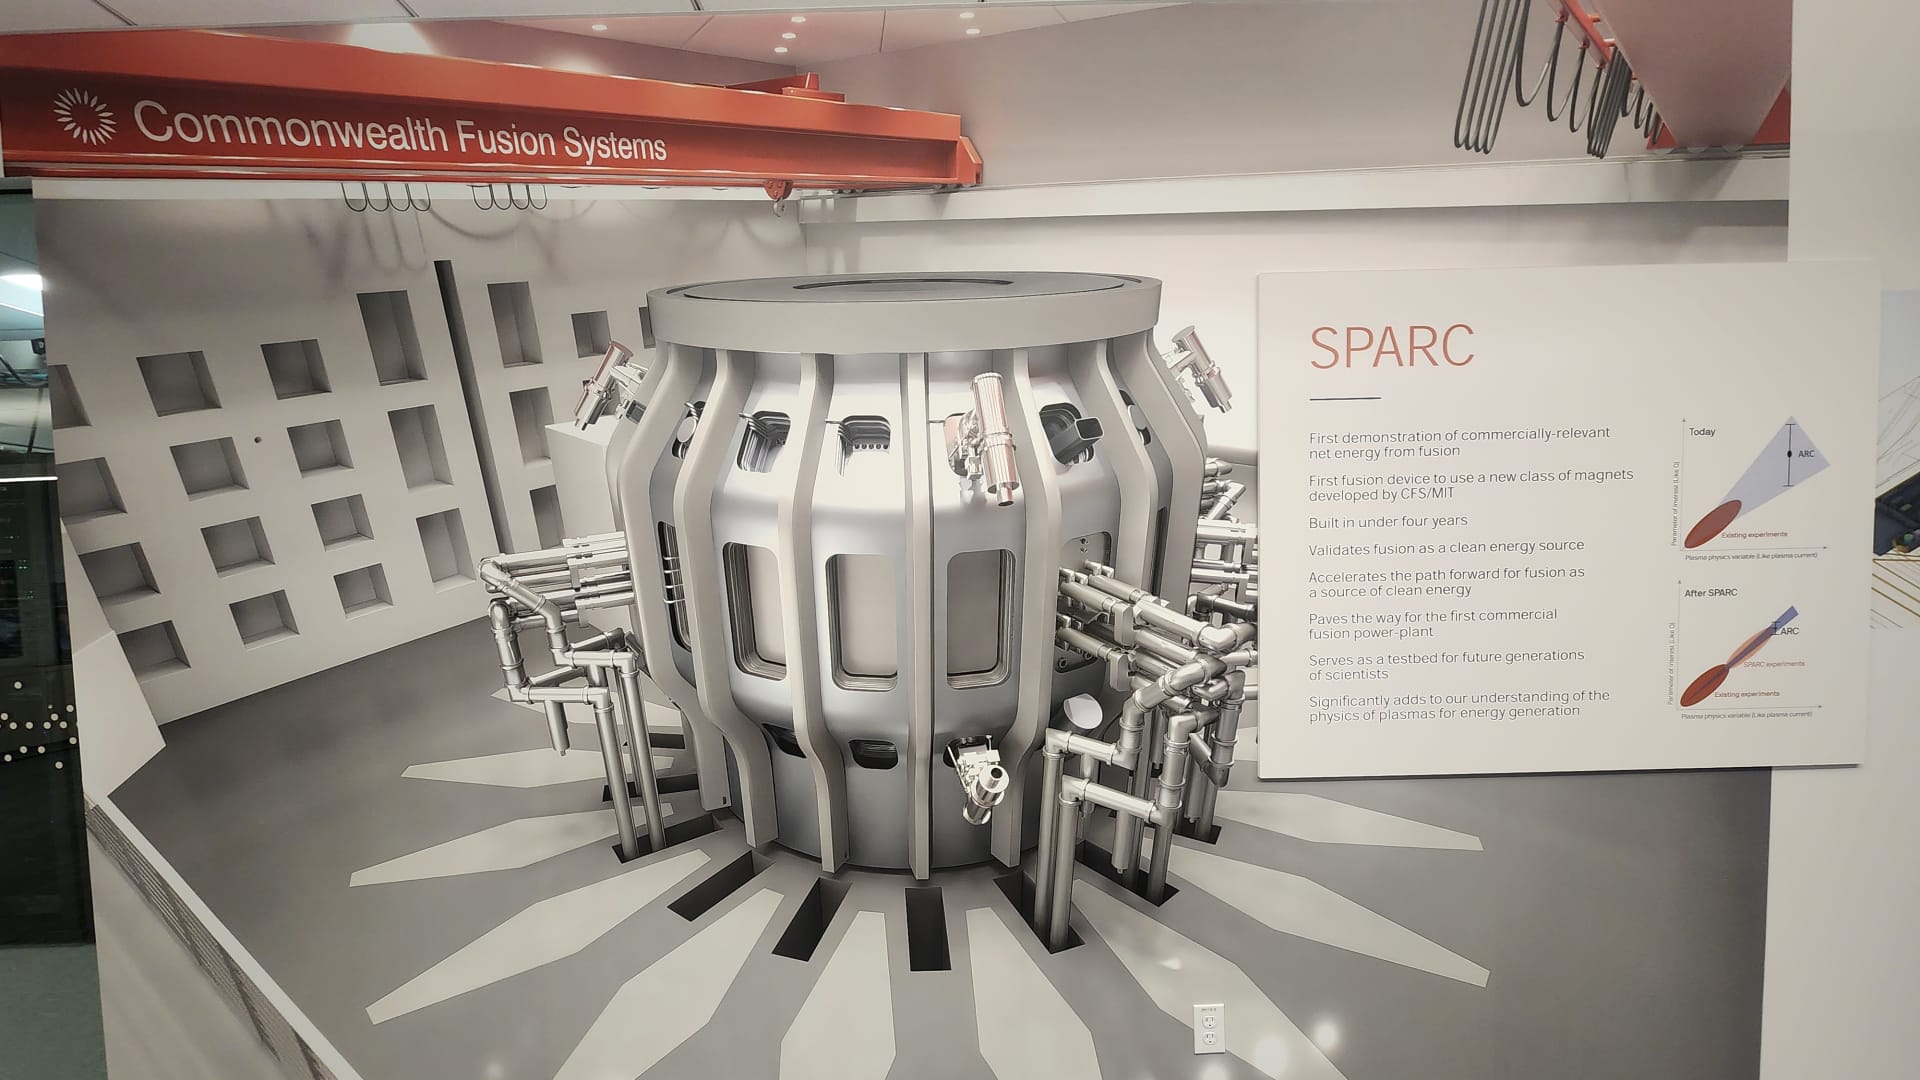 A rendering of the SPARC device Commonwealth Fusion Systems is building to demonstrate net energy.